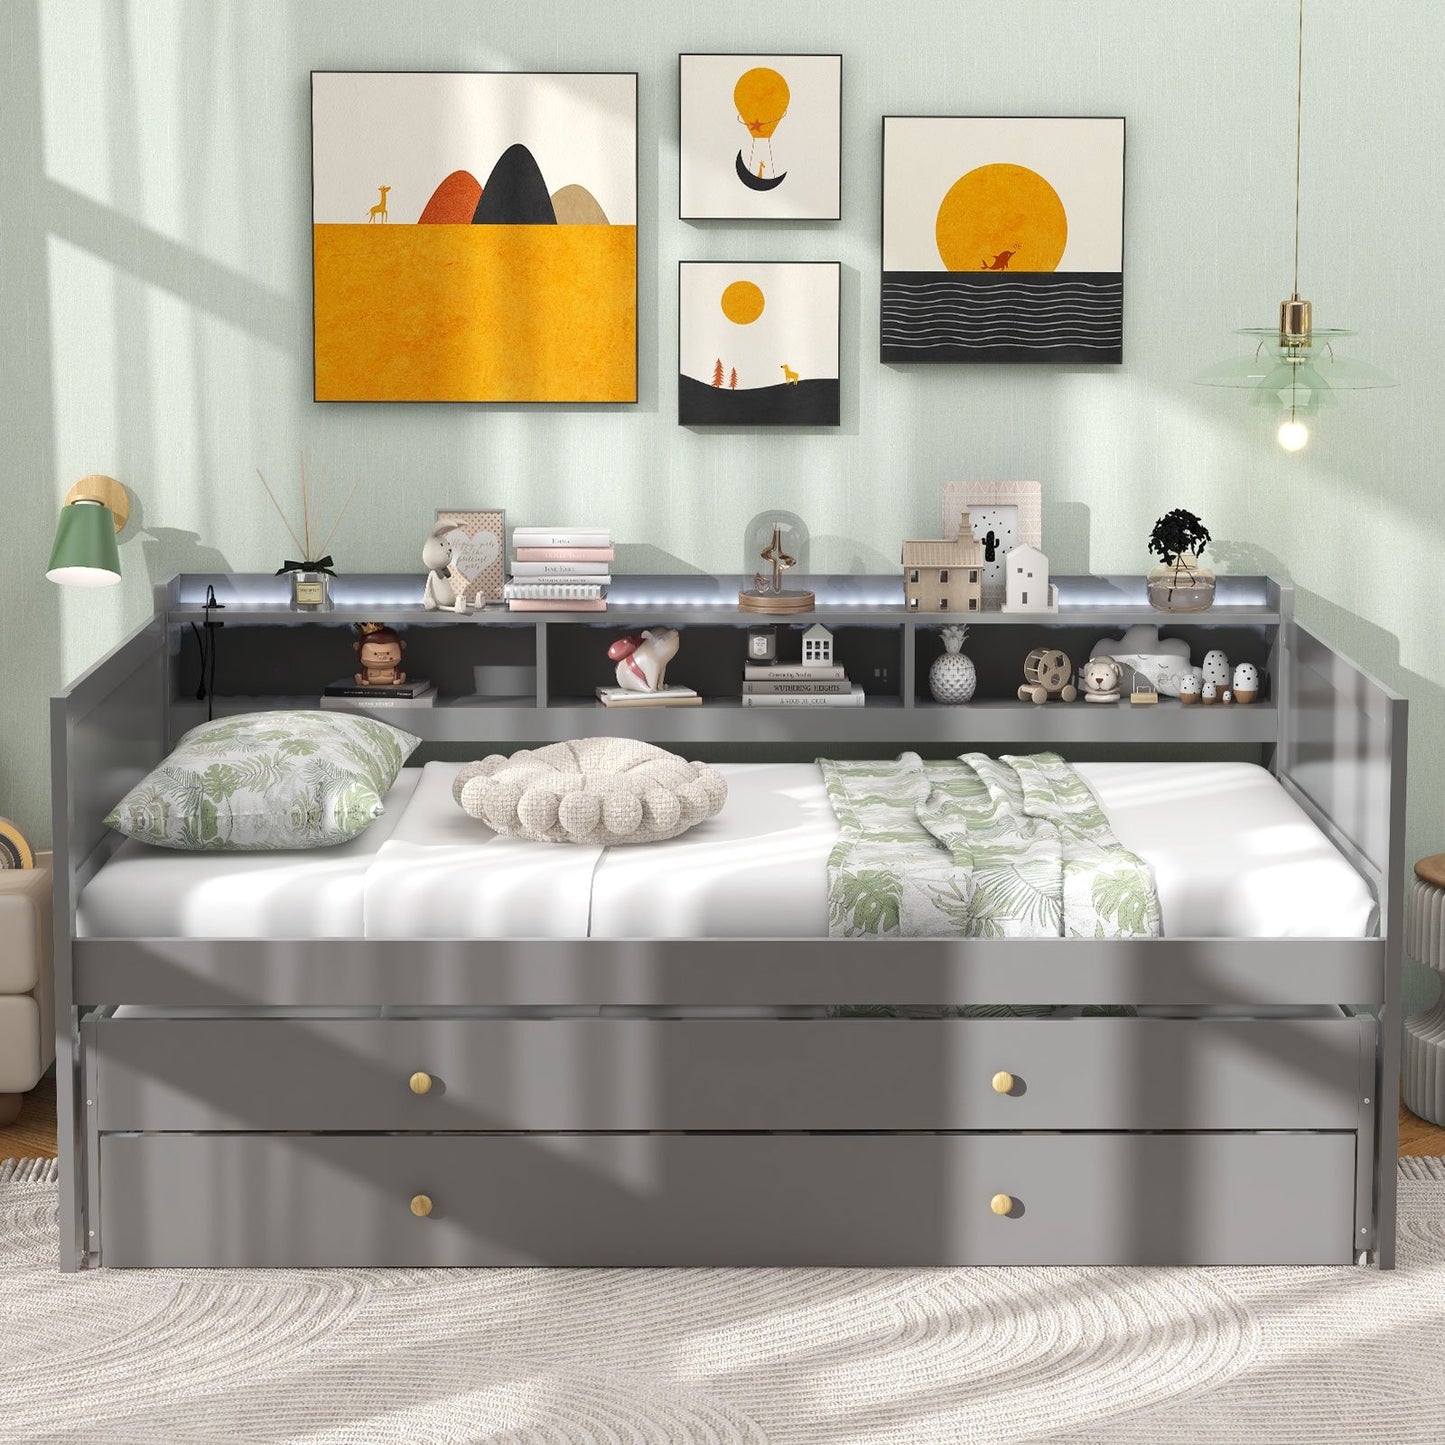 Twin XL Captain Bed with 2 Twin Trundle Beds and 3 Storage Cubbies, Gray